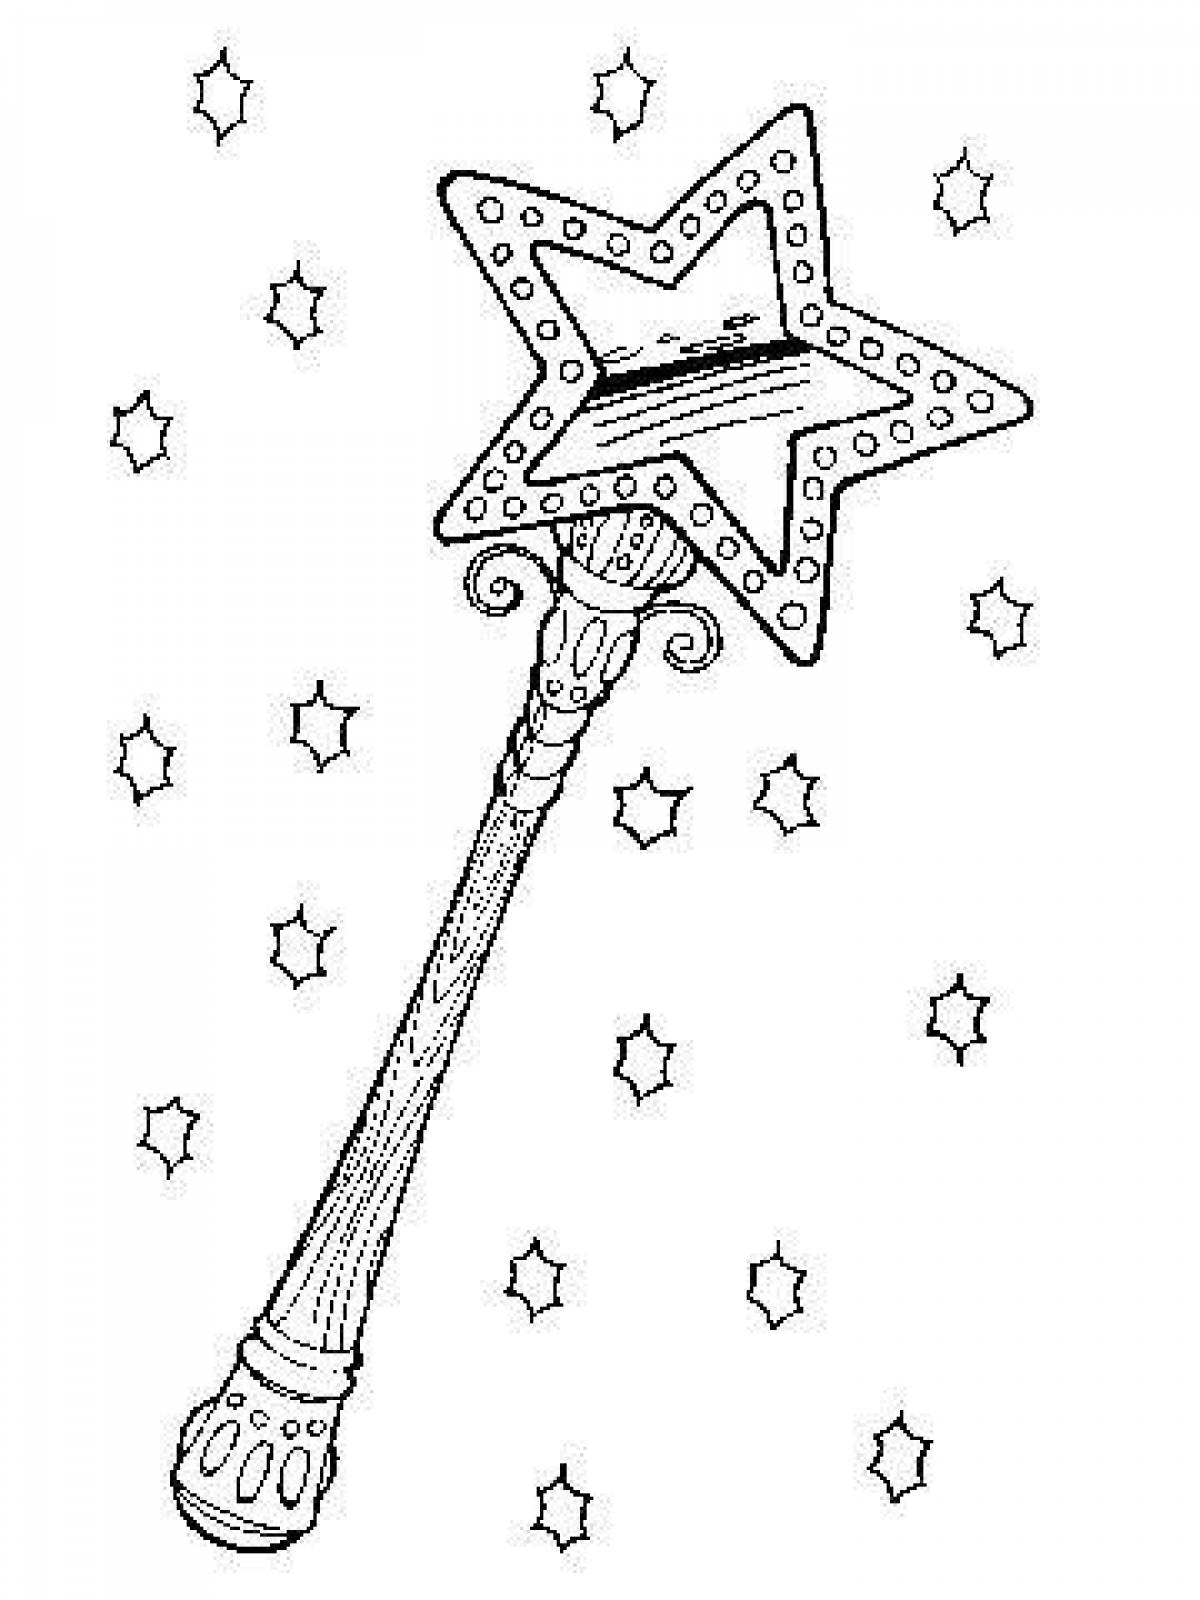 Exquisite magic wand coloring book